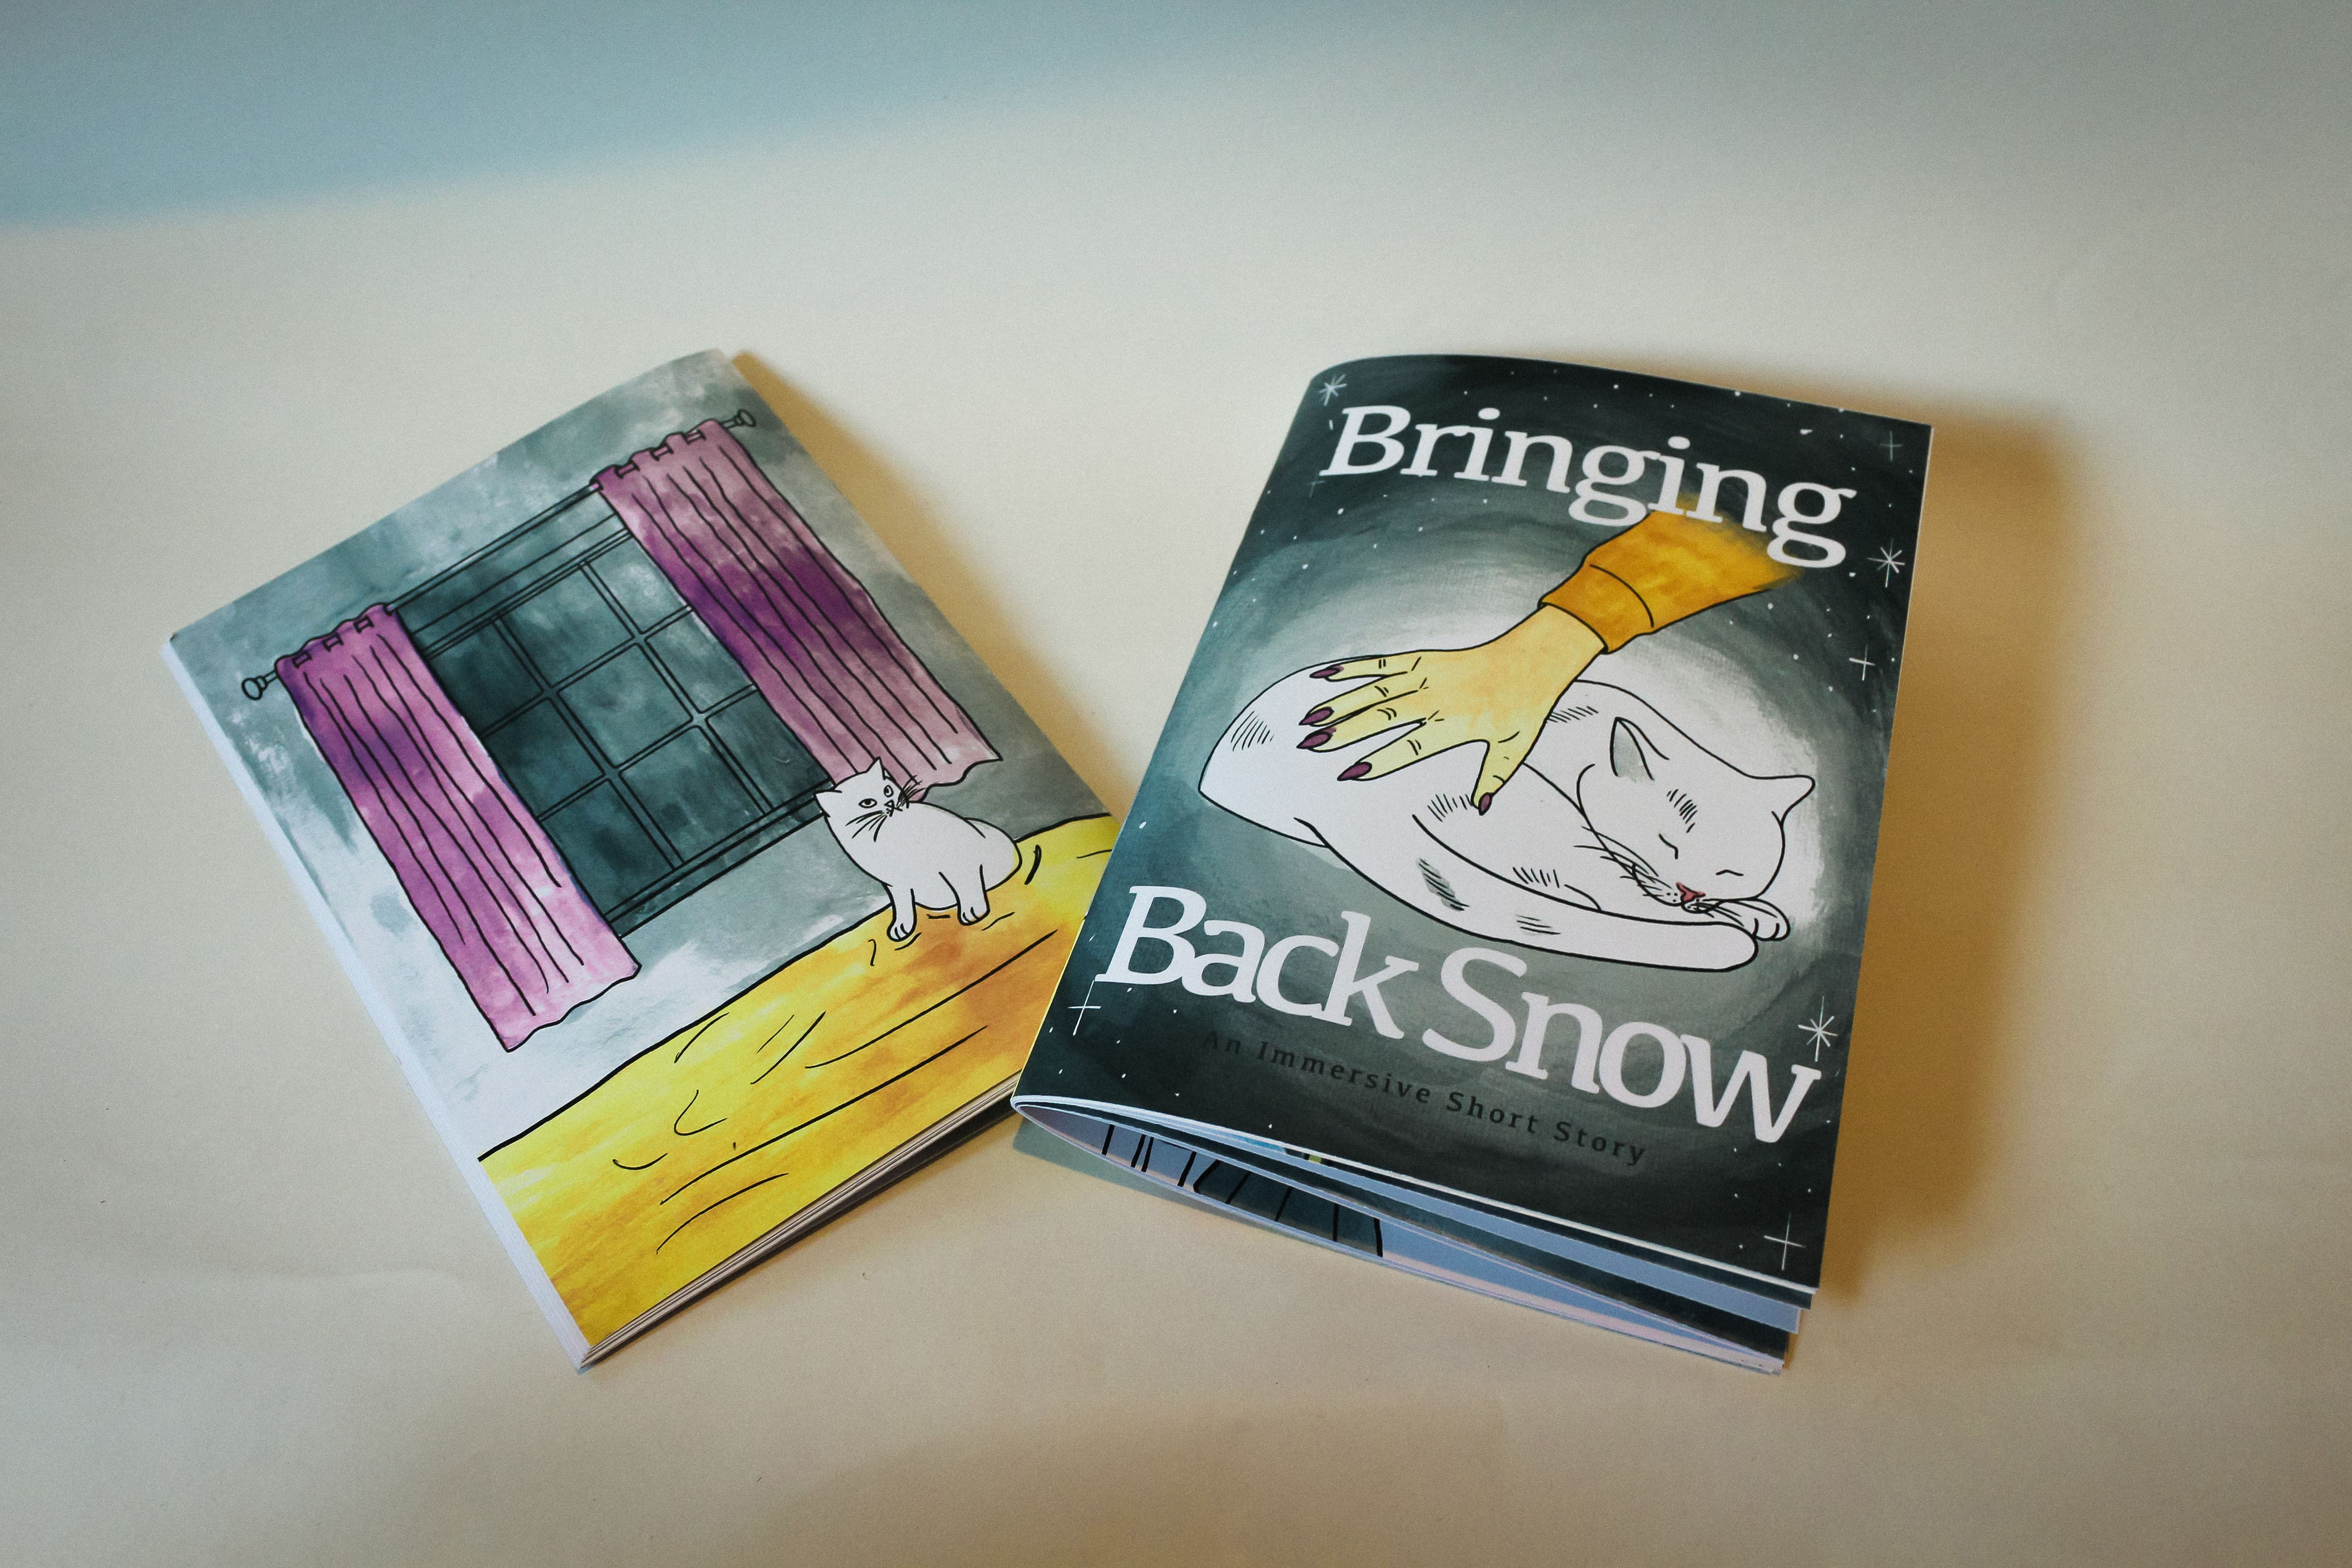 A photograph of 24-page short story zine titled 'Bringing Back Snow'. The front cover shows an illustration of a curled up white cat, being petted by a yellow hand.